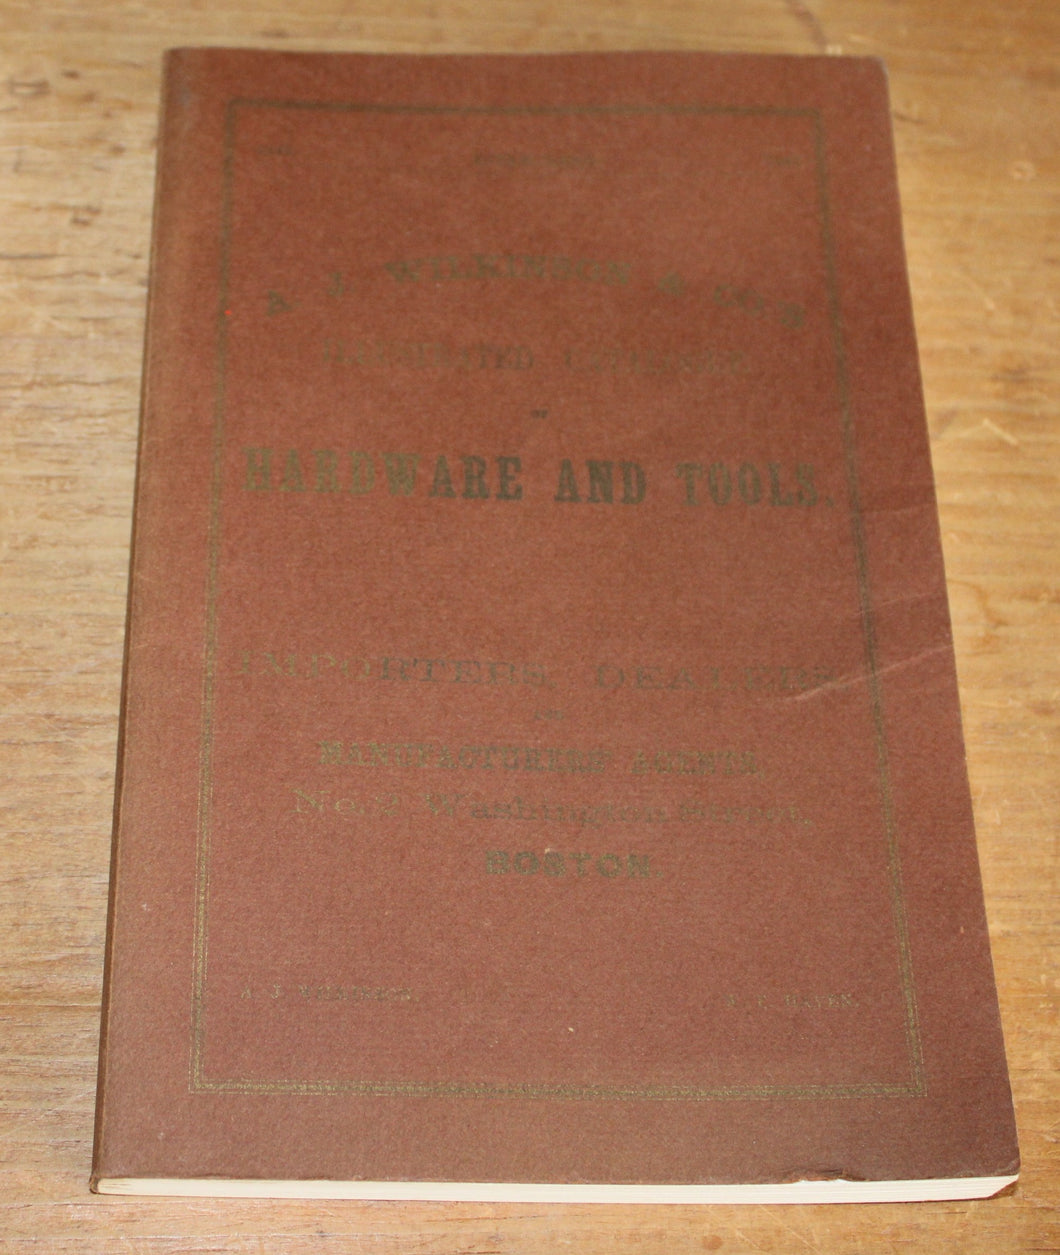 A. J. Wilkinson & Co's - Illustrated Catalogue Hardware and Tools 1867 - Reprint